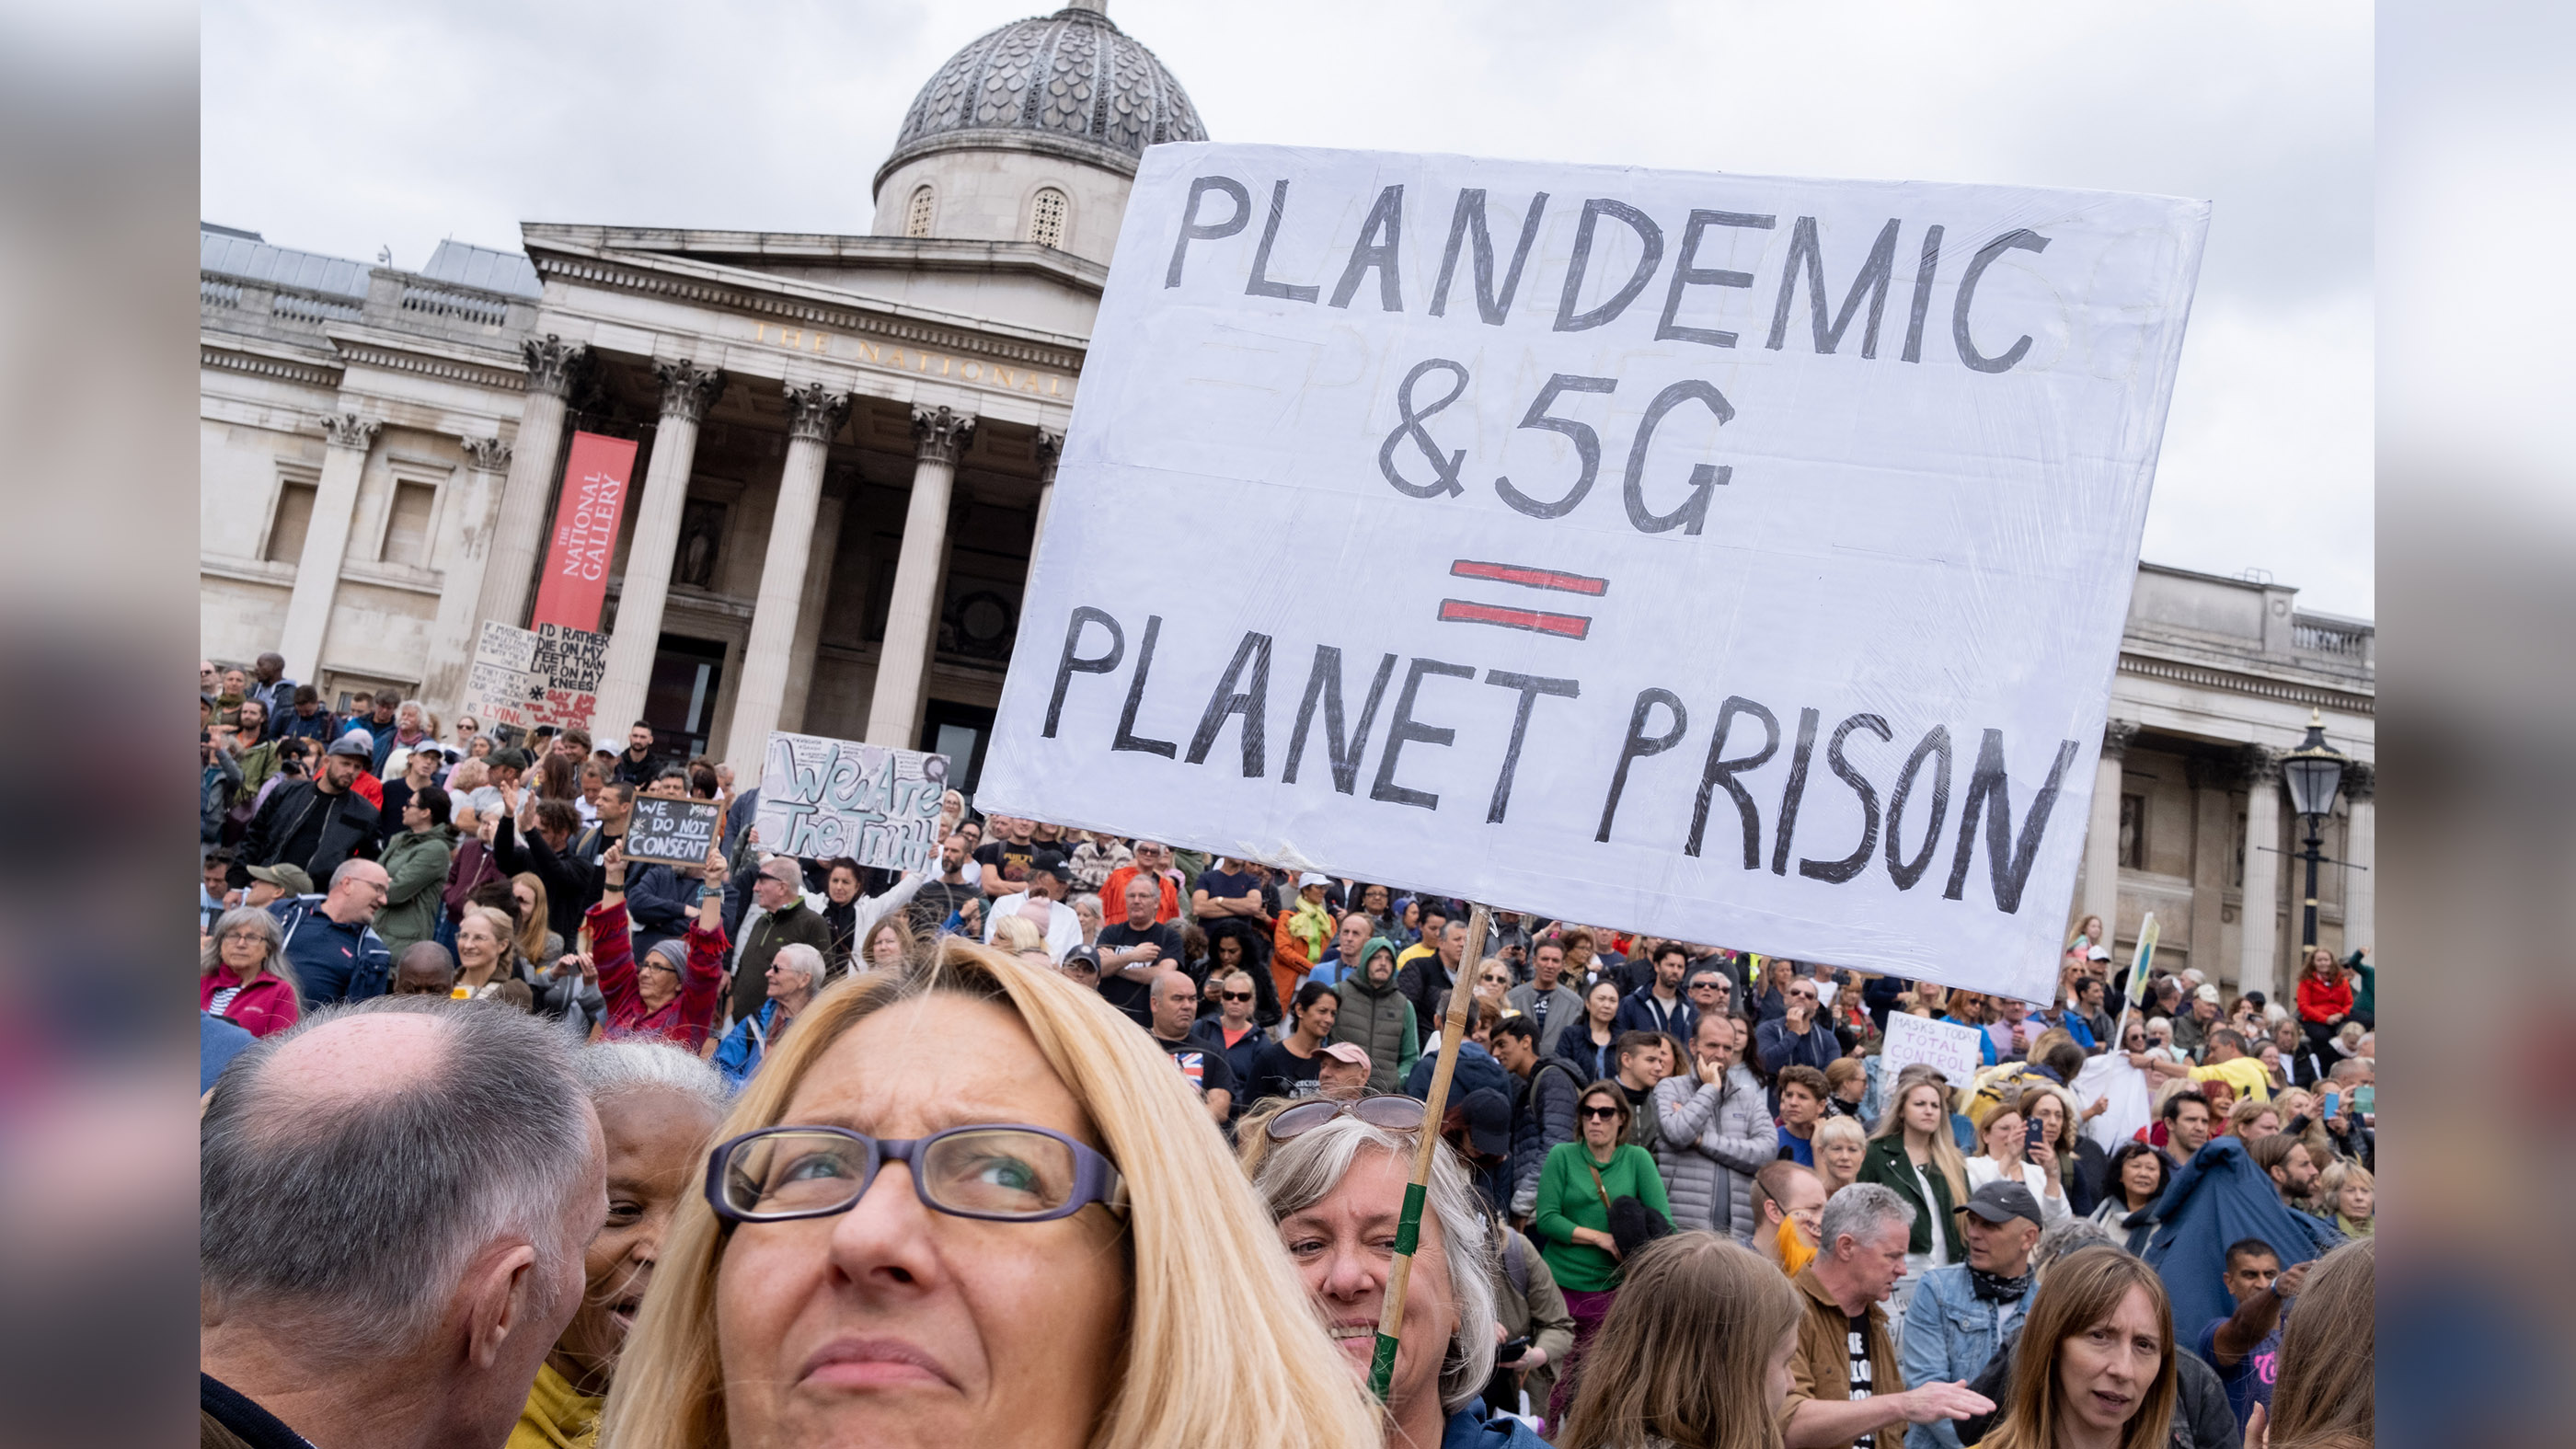 Anti-lockdown conspiracy theorists and coronavirus deniers protest in Trafalgar Square in London against the government and mainstream media who, they say, are behind disinformation and untruths about the COVID-19 pandemic, on Aug. 29, 2020.